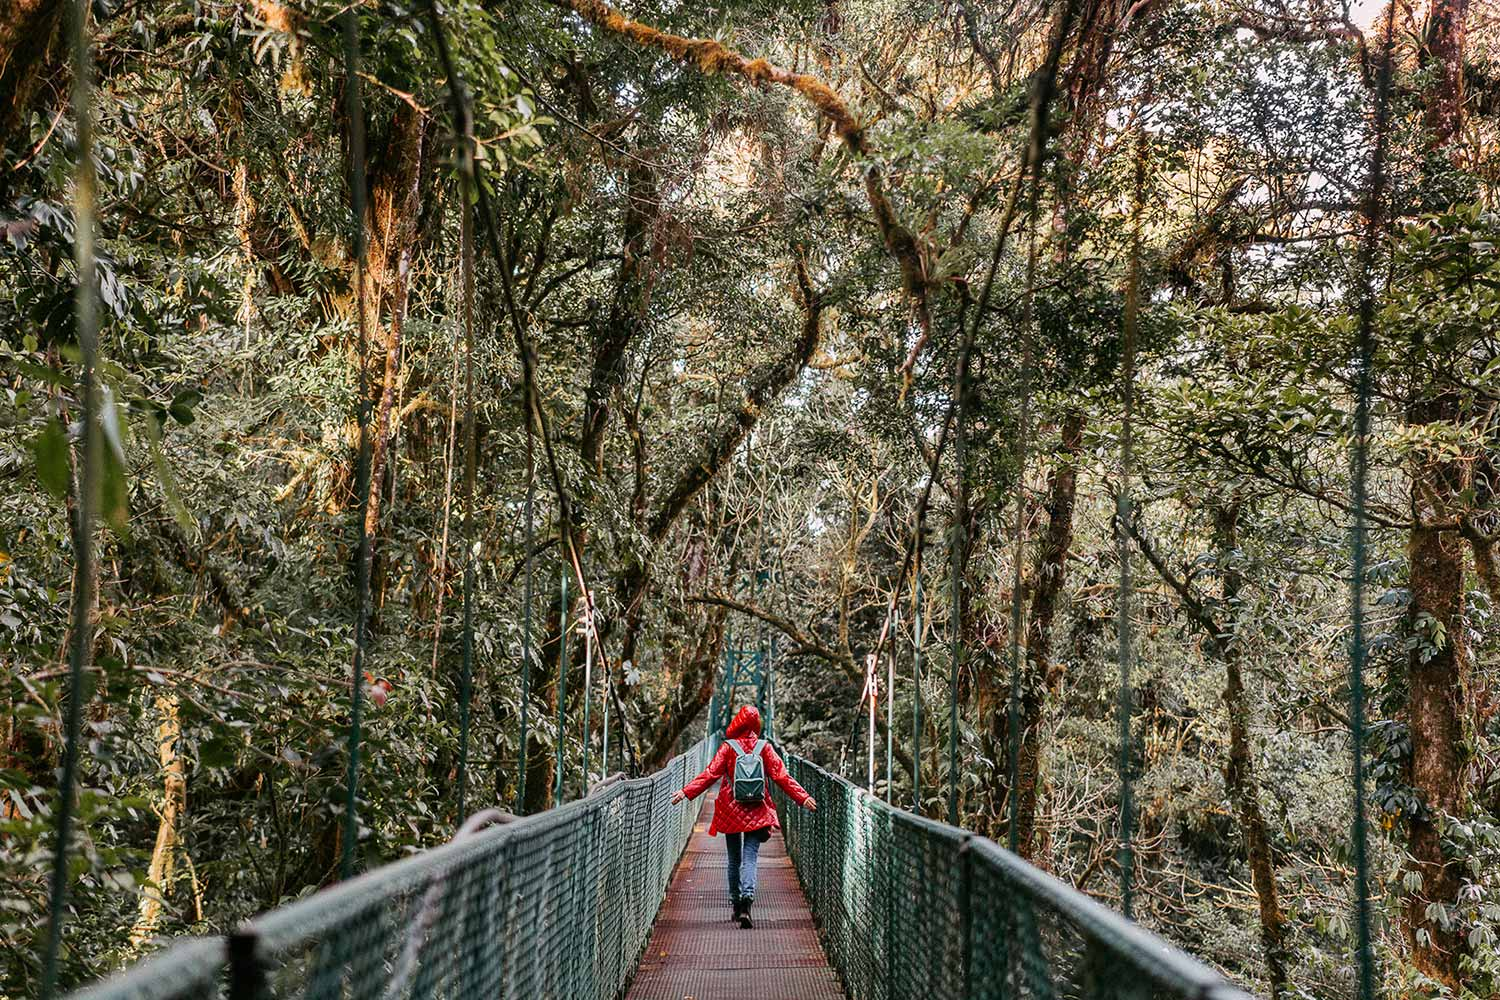 Explore unique perspectives on nature by traversing all the trails in Monteverde Cloud Forest Preserve.